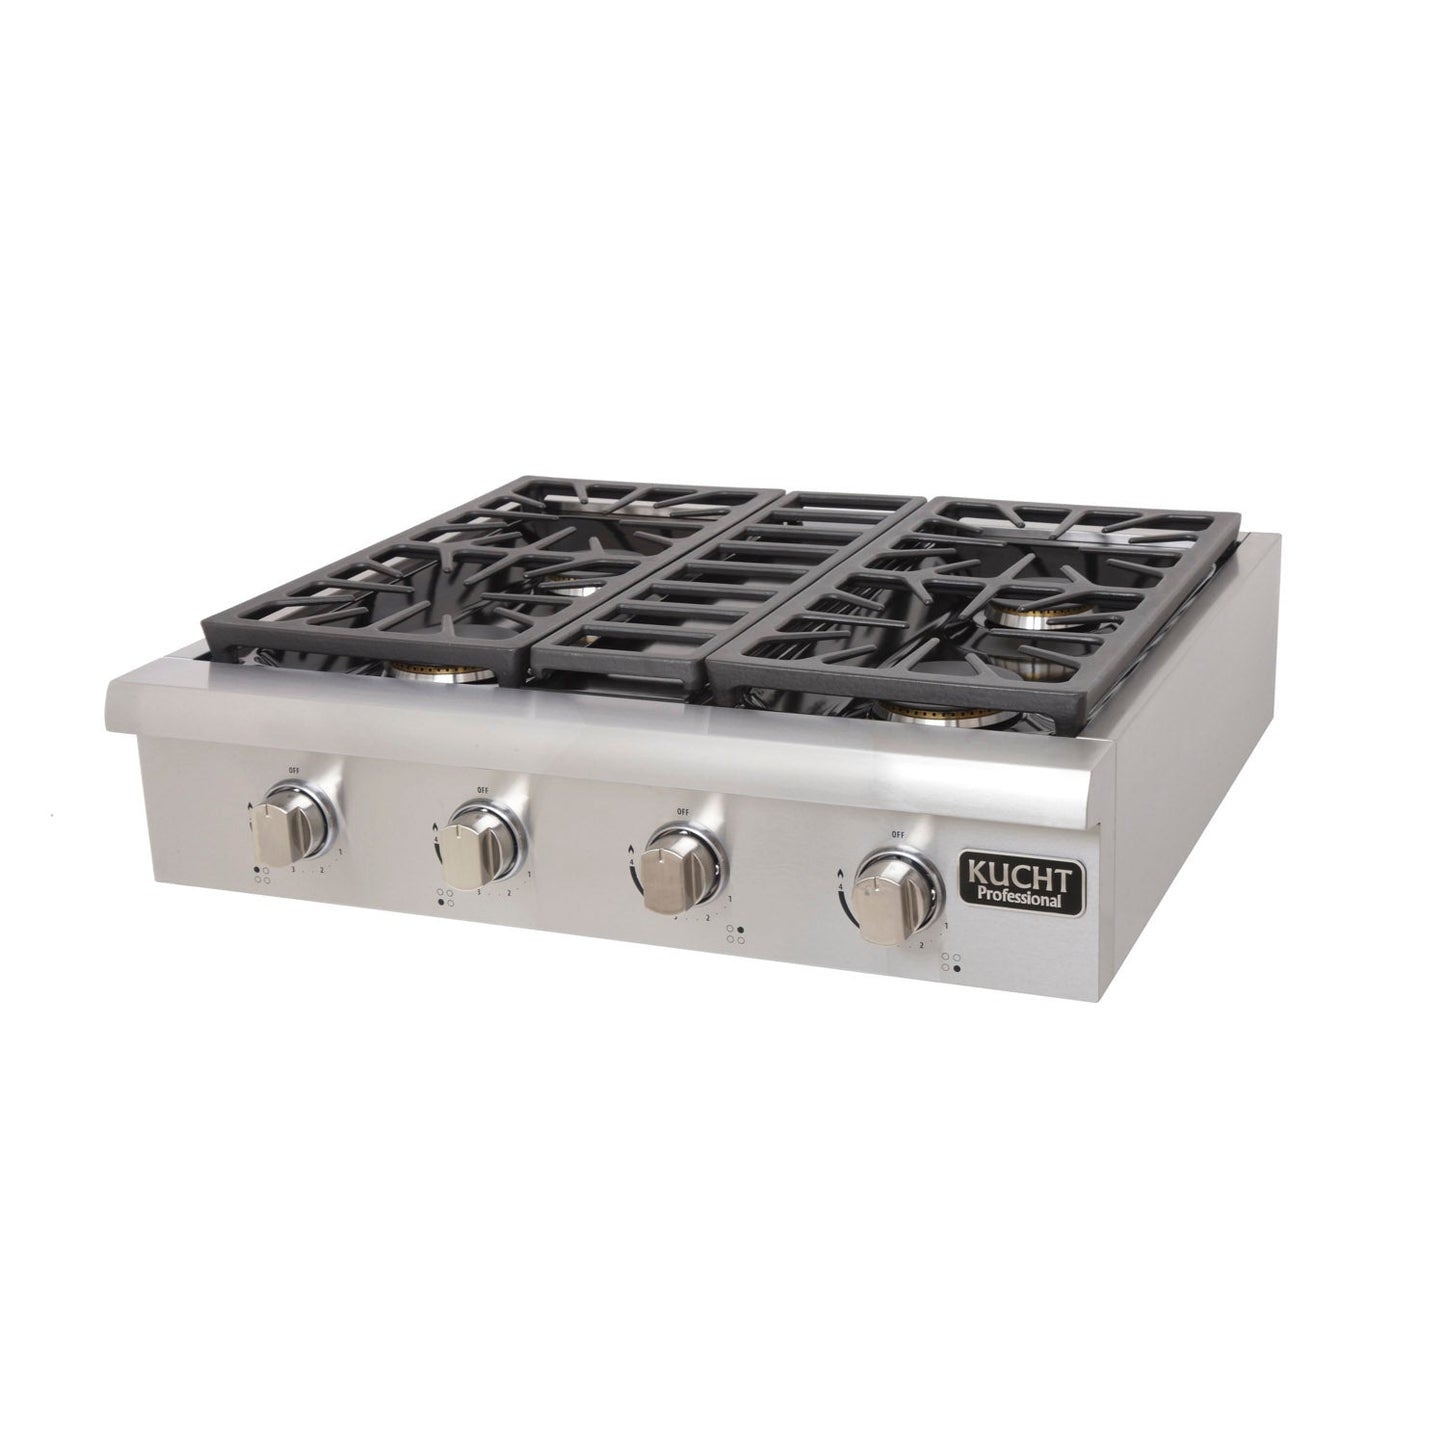 Kucht KRT Series 30" Propane Gas Range-Top With 4 Burners and Classic Silver Knobs